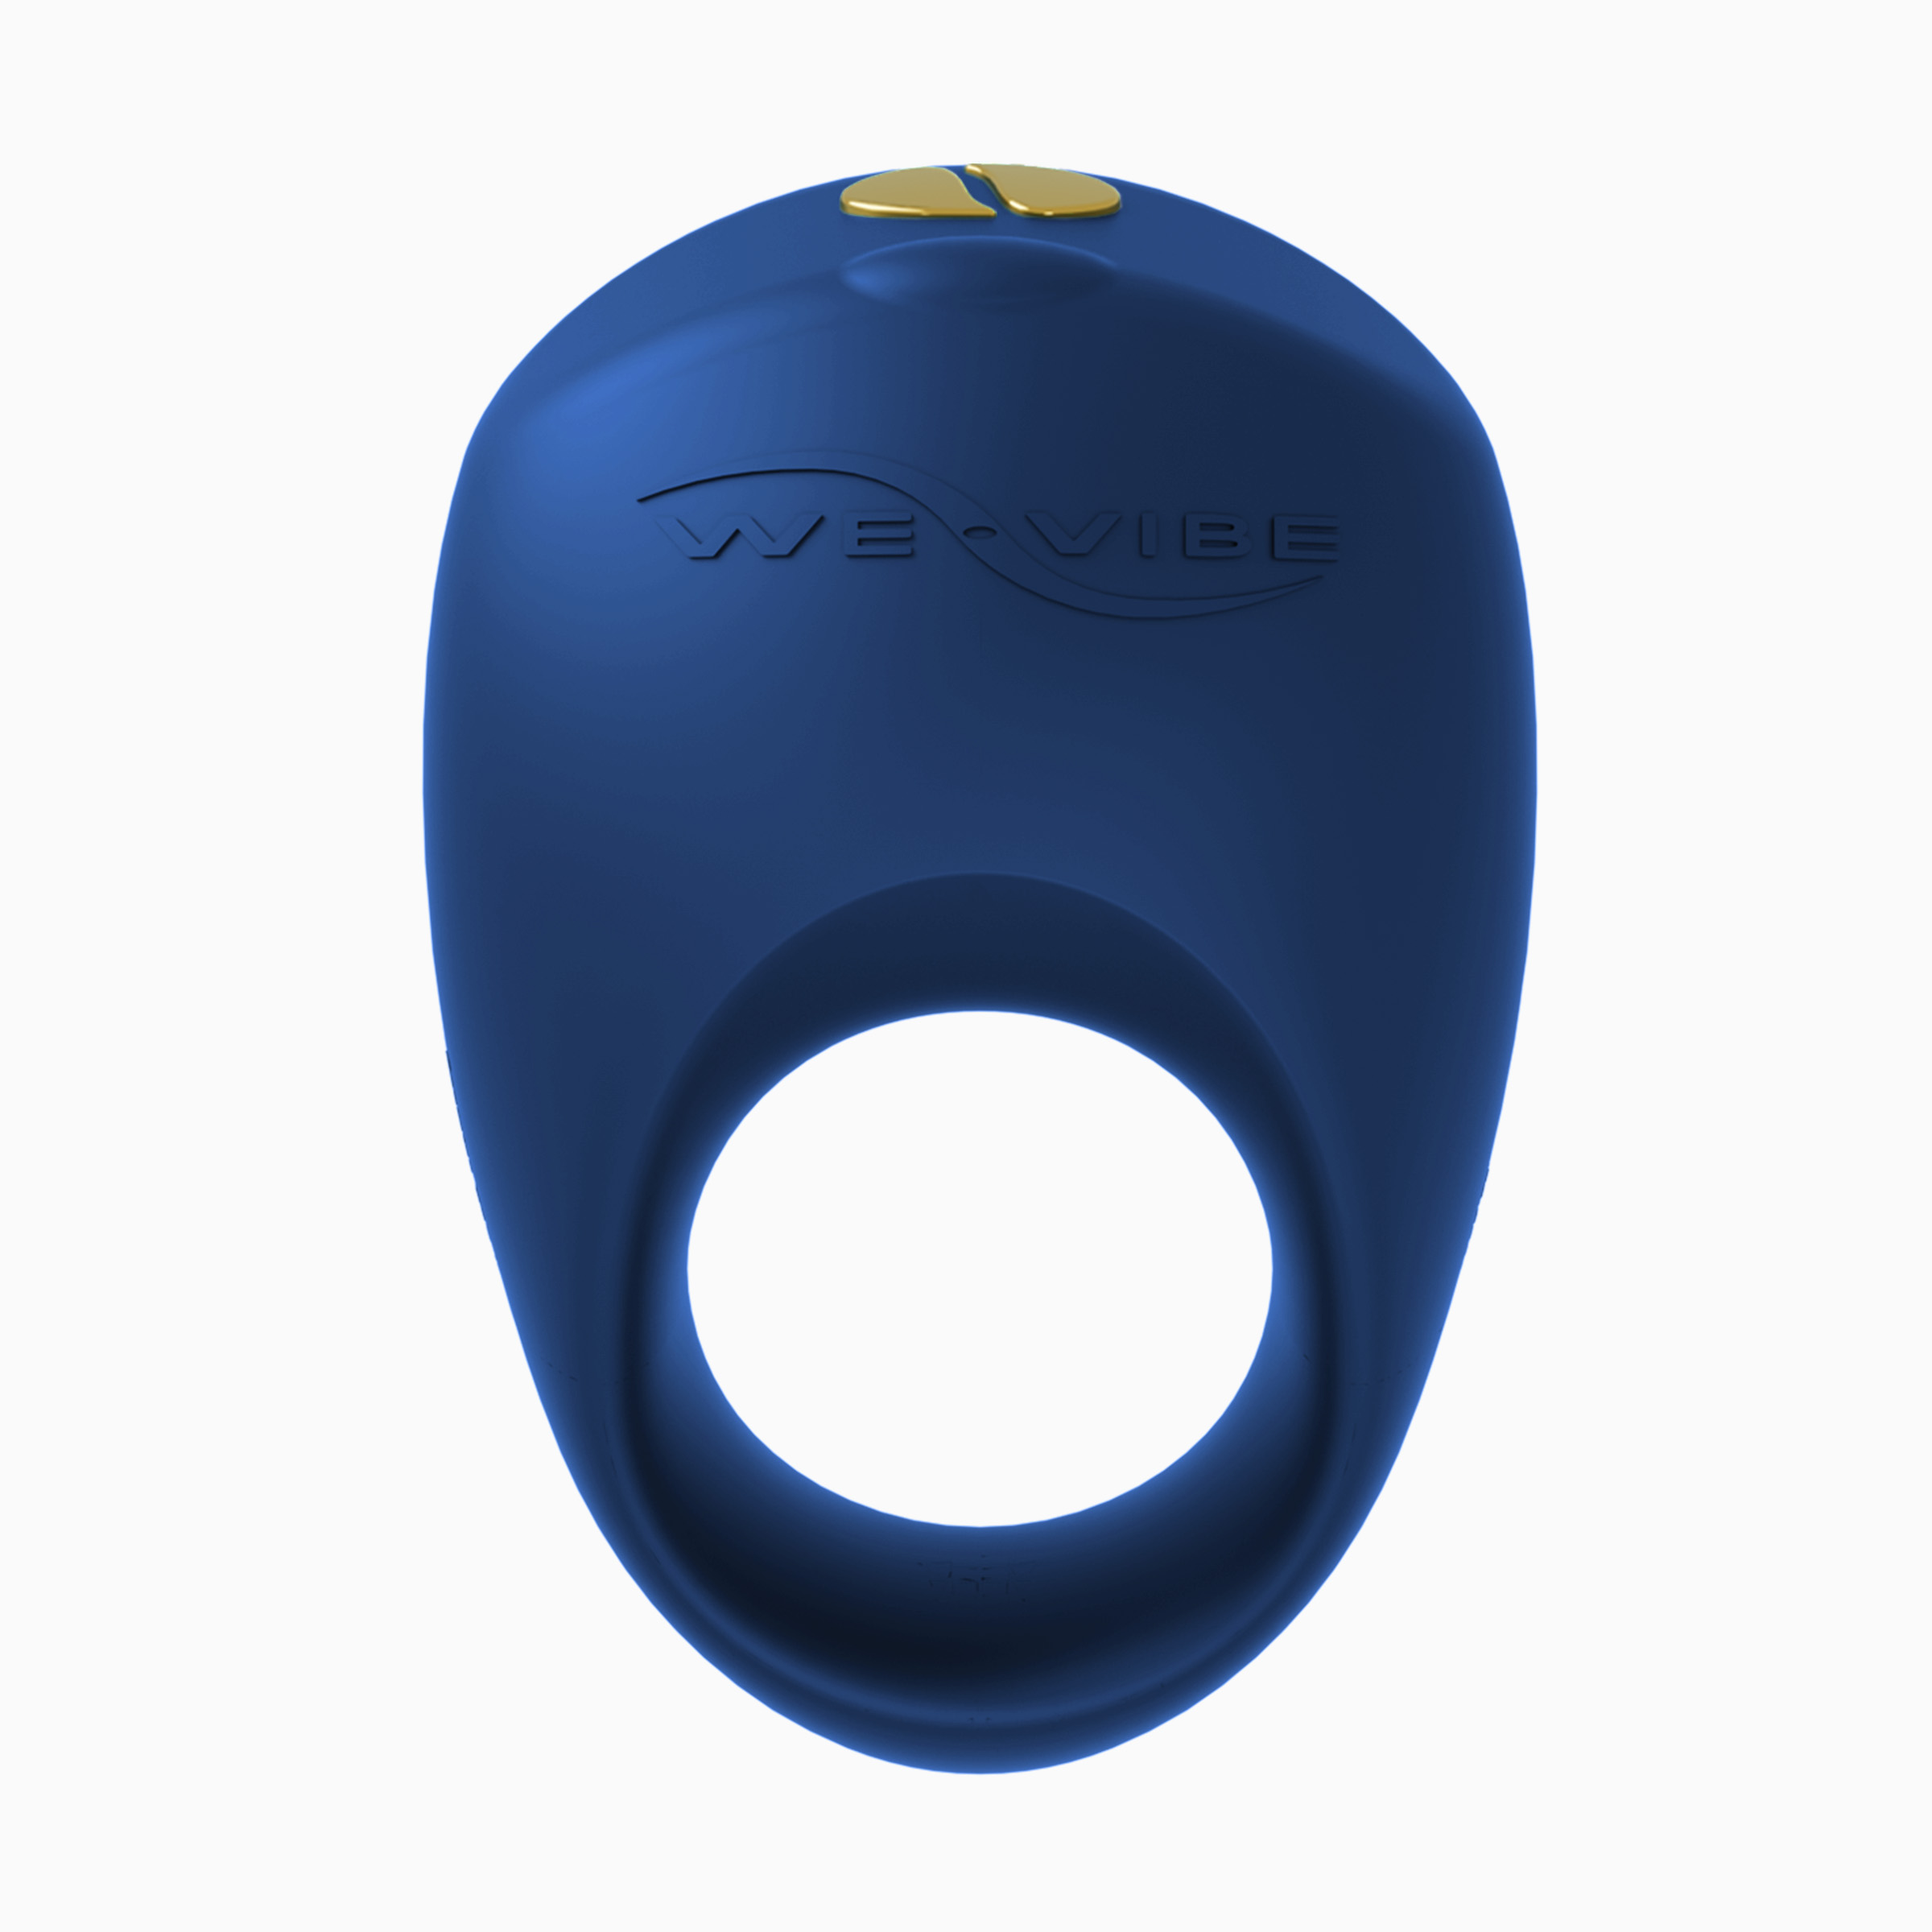 We-Vibe Pivot Wearable Vibrating Ring with Remote and App, Blue - image 1 of 9